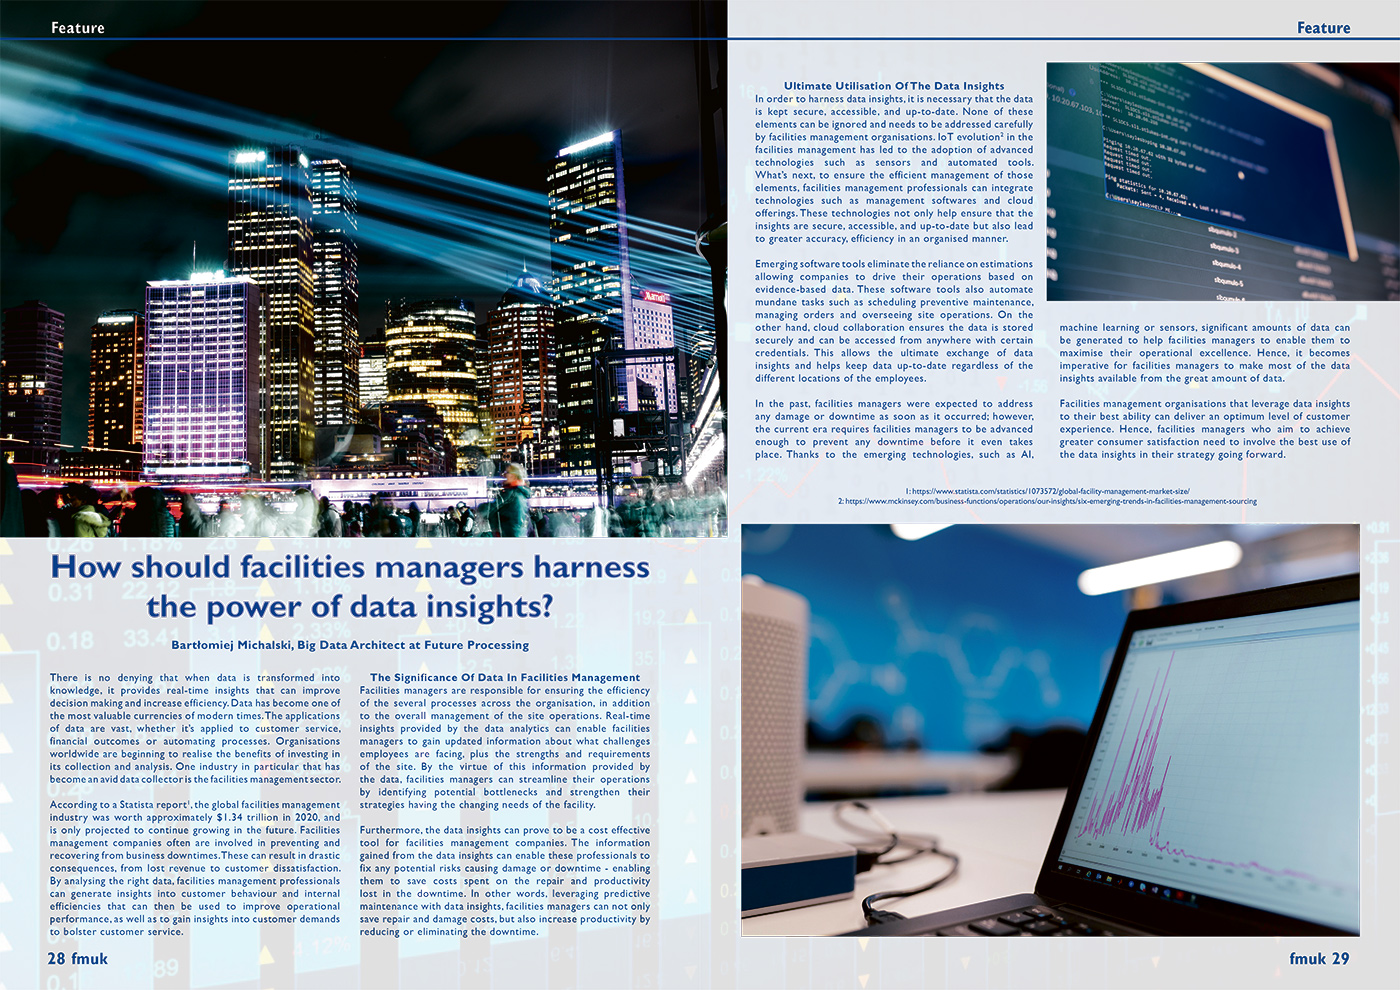 How Should Facilities Managers Harness The Power Of Data Insights?